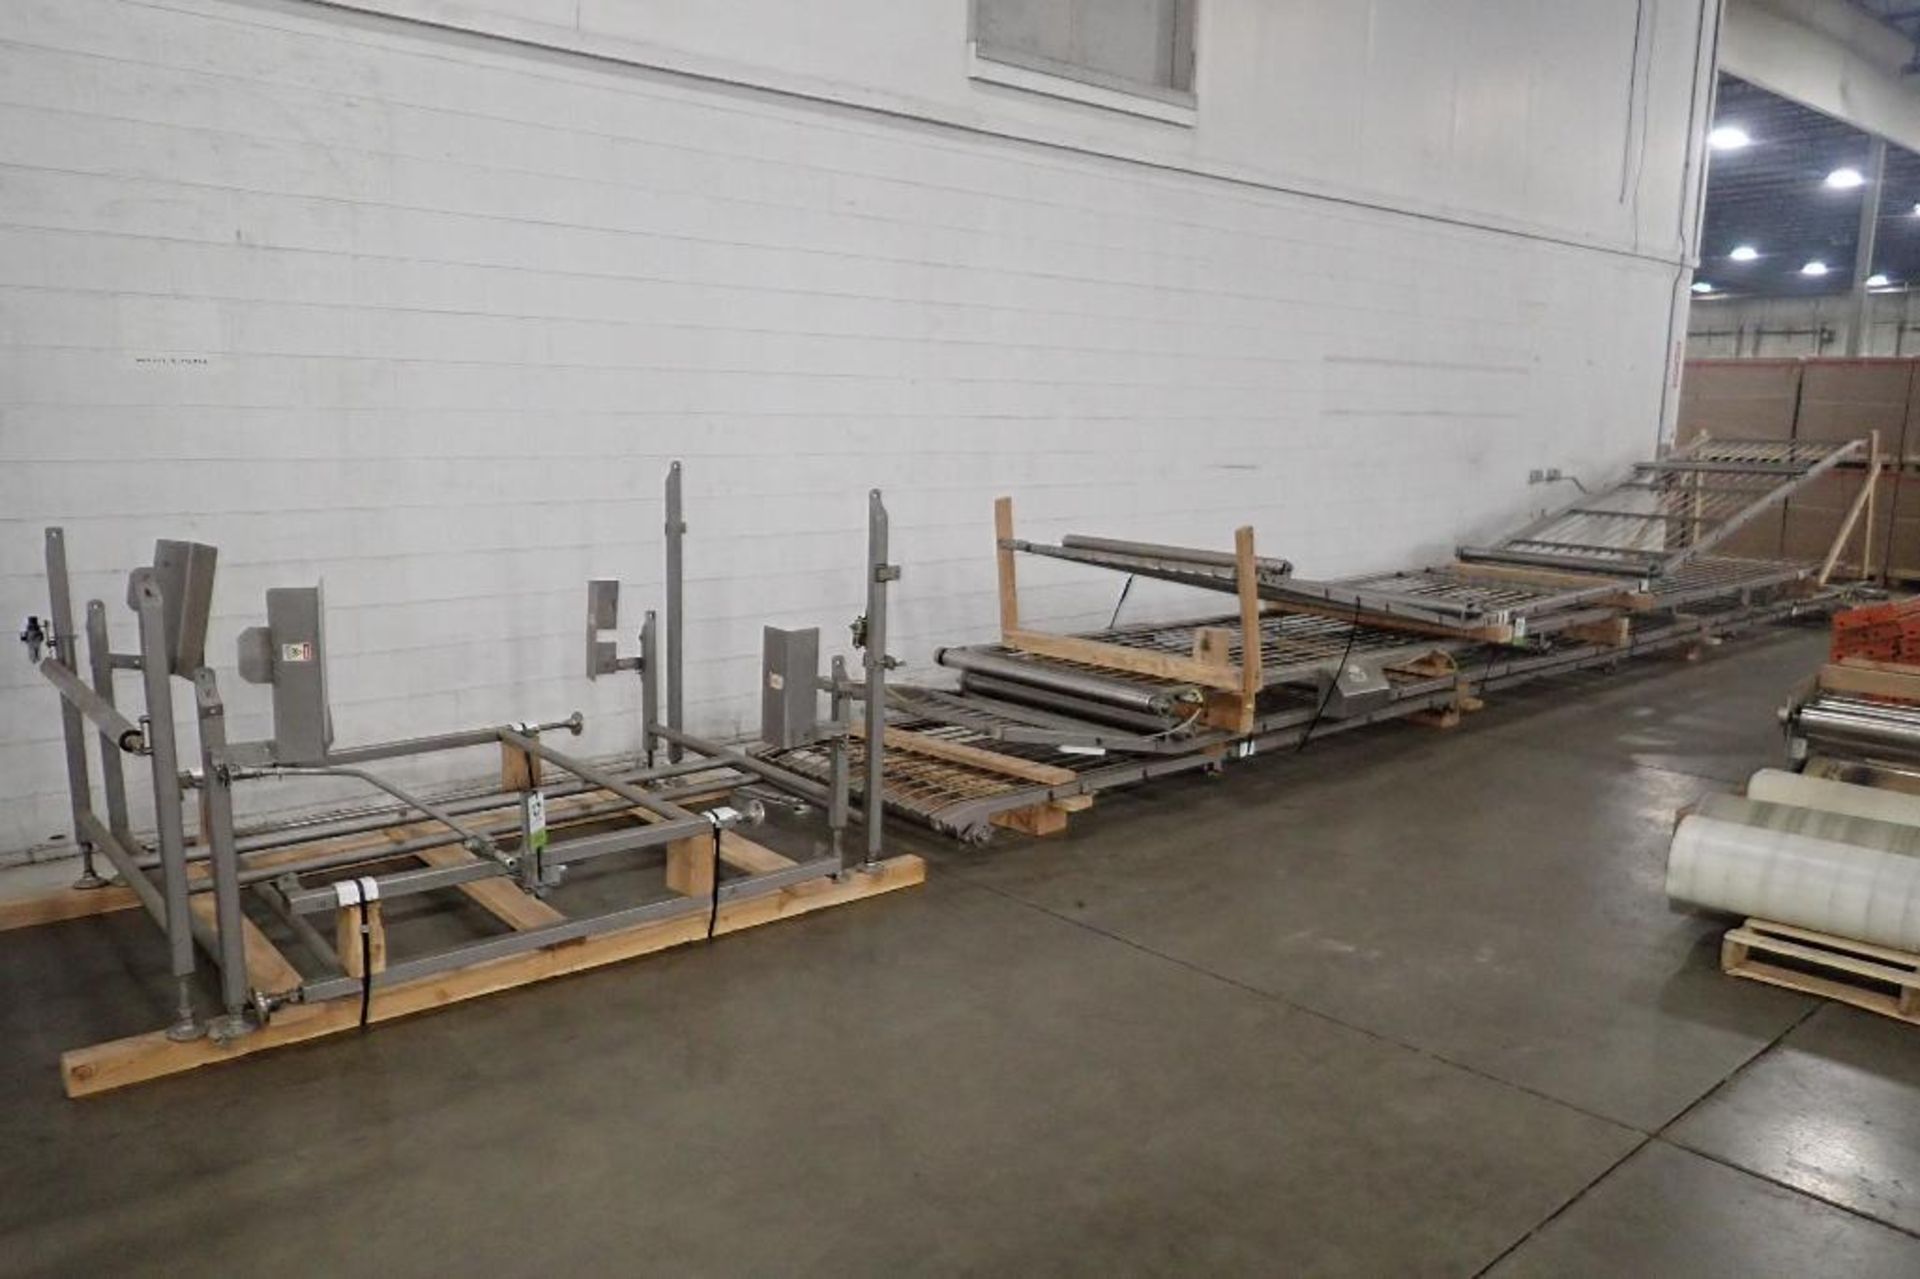 Kofab incline decline conveyor, 51 in. wide belt, approximately 150 ft, (2) drive sections, legs, be